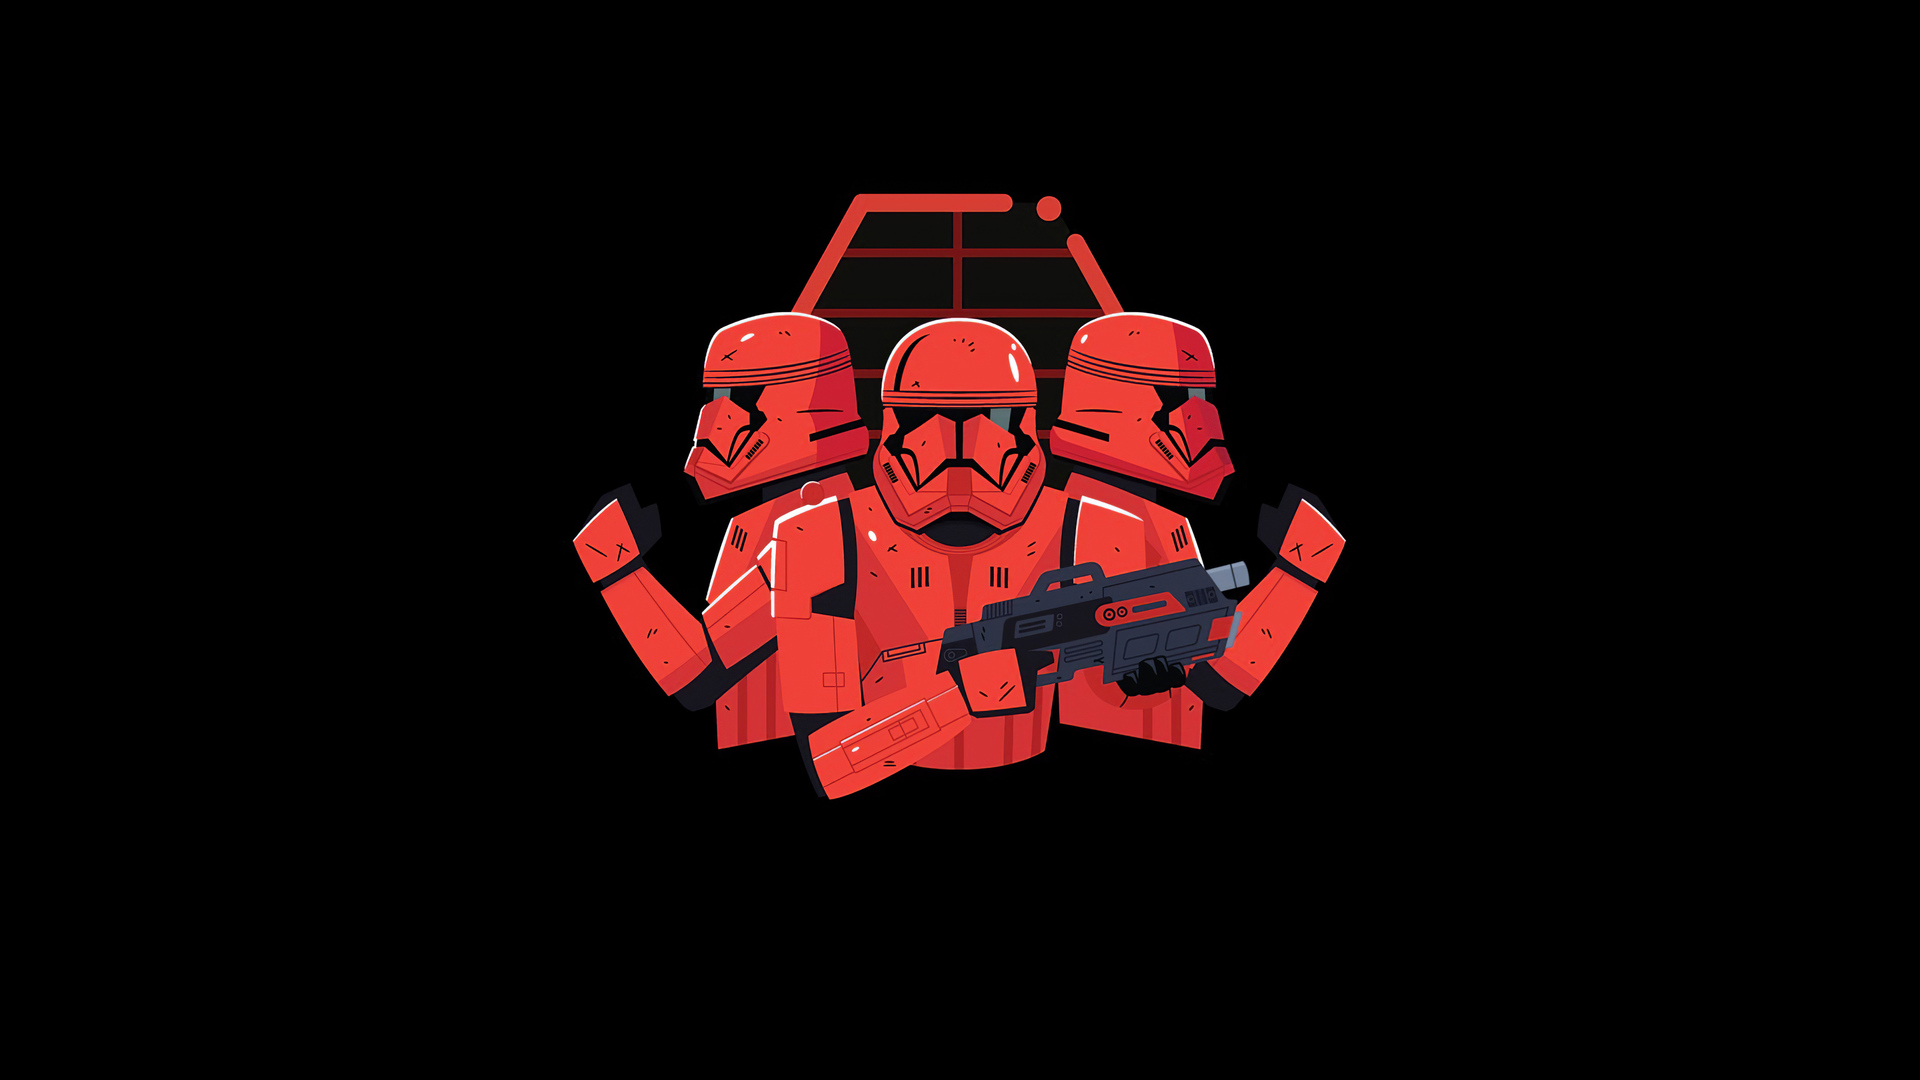 1920x1080 Star Wars Stormtrooper Minimal Art Laptop Full Hd 1080p Hd 4k Wallpapers Images Backgrounds Photos And Pictures Wars tie fighter wallpaper, star wars luke skywalker wallpaper, star wars lego wallpaper, star wars binary sunset wallpaper, minimalist wallpaper star wars, star wars cool wallpaper, star wars cell phone wallpaper, star wars animated wallpaper, star wars hd wallpaper 1920×1080, hi res star. star wars stormtrooper minimal art